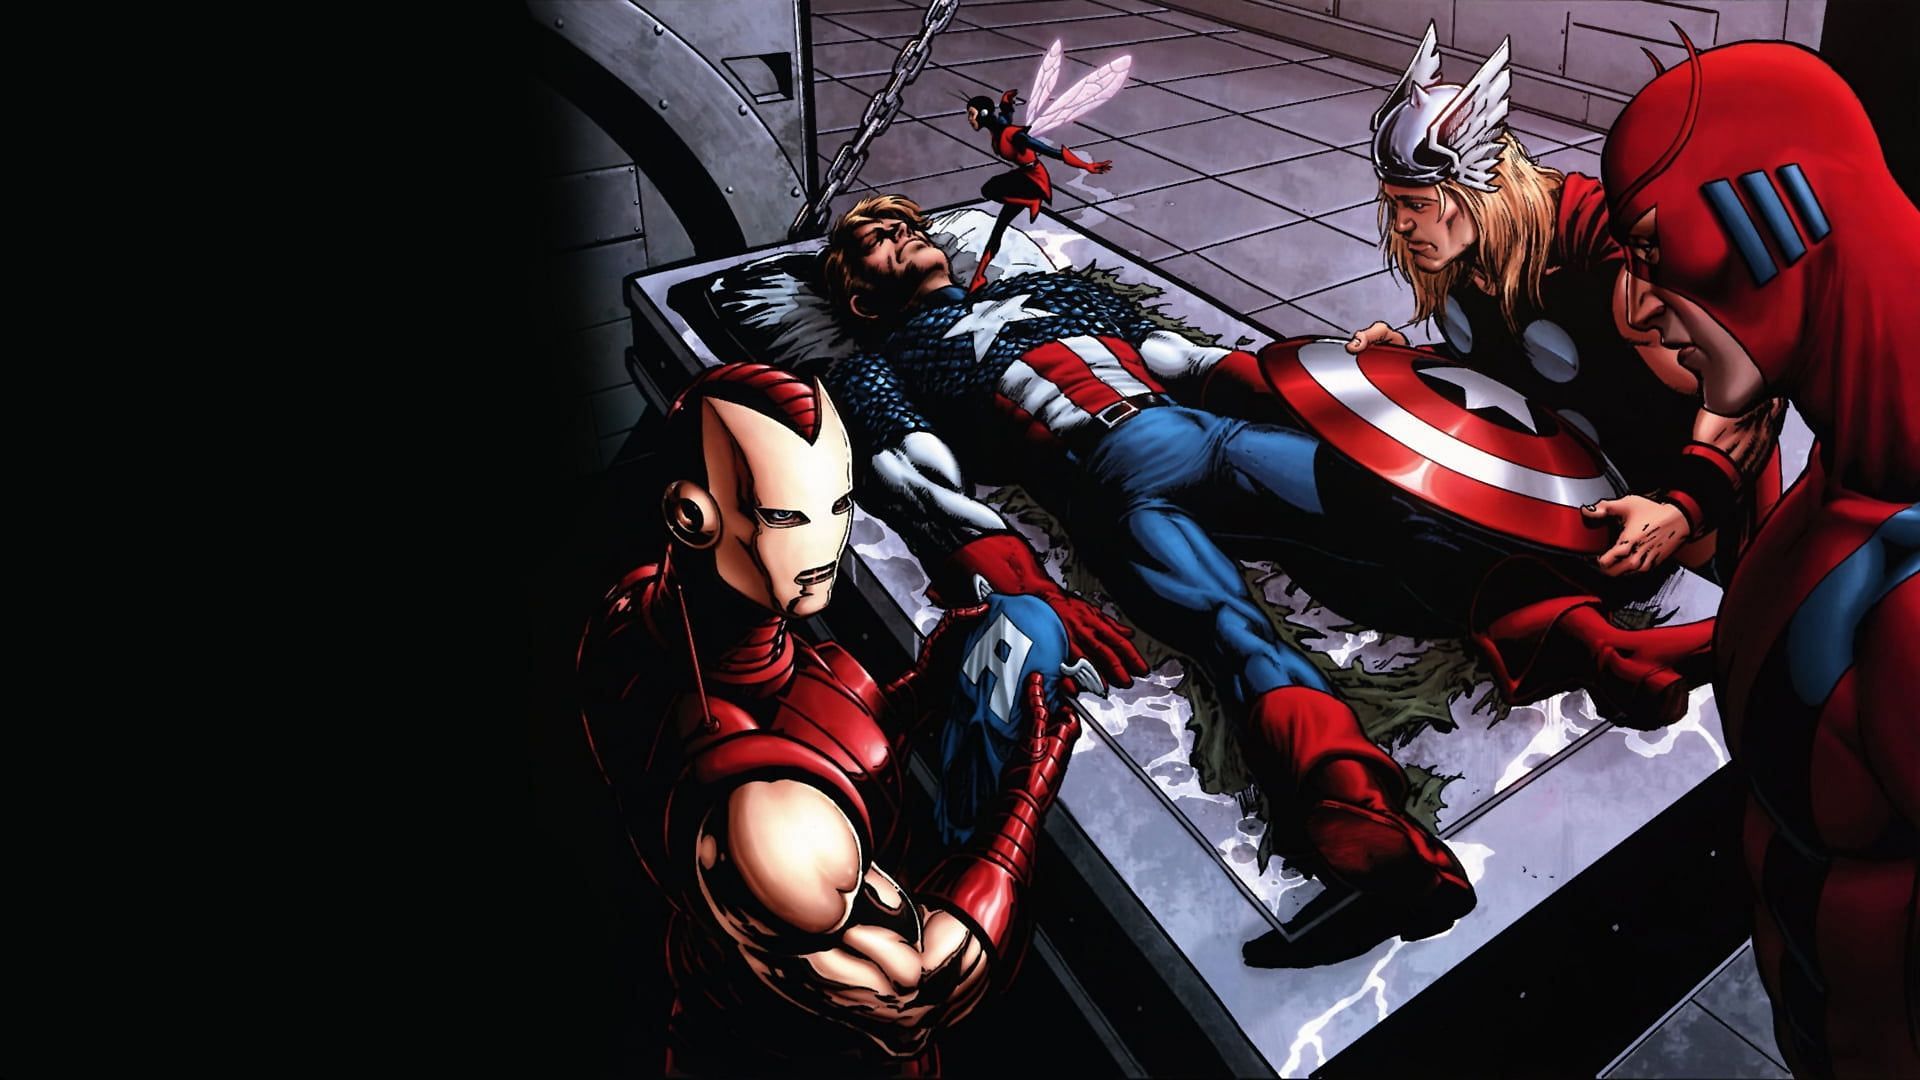 The death of Captain America is one of the most significant events in Marvel comics. (Image Via Marvel)